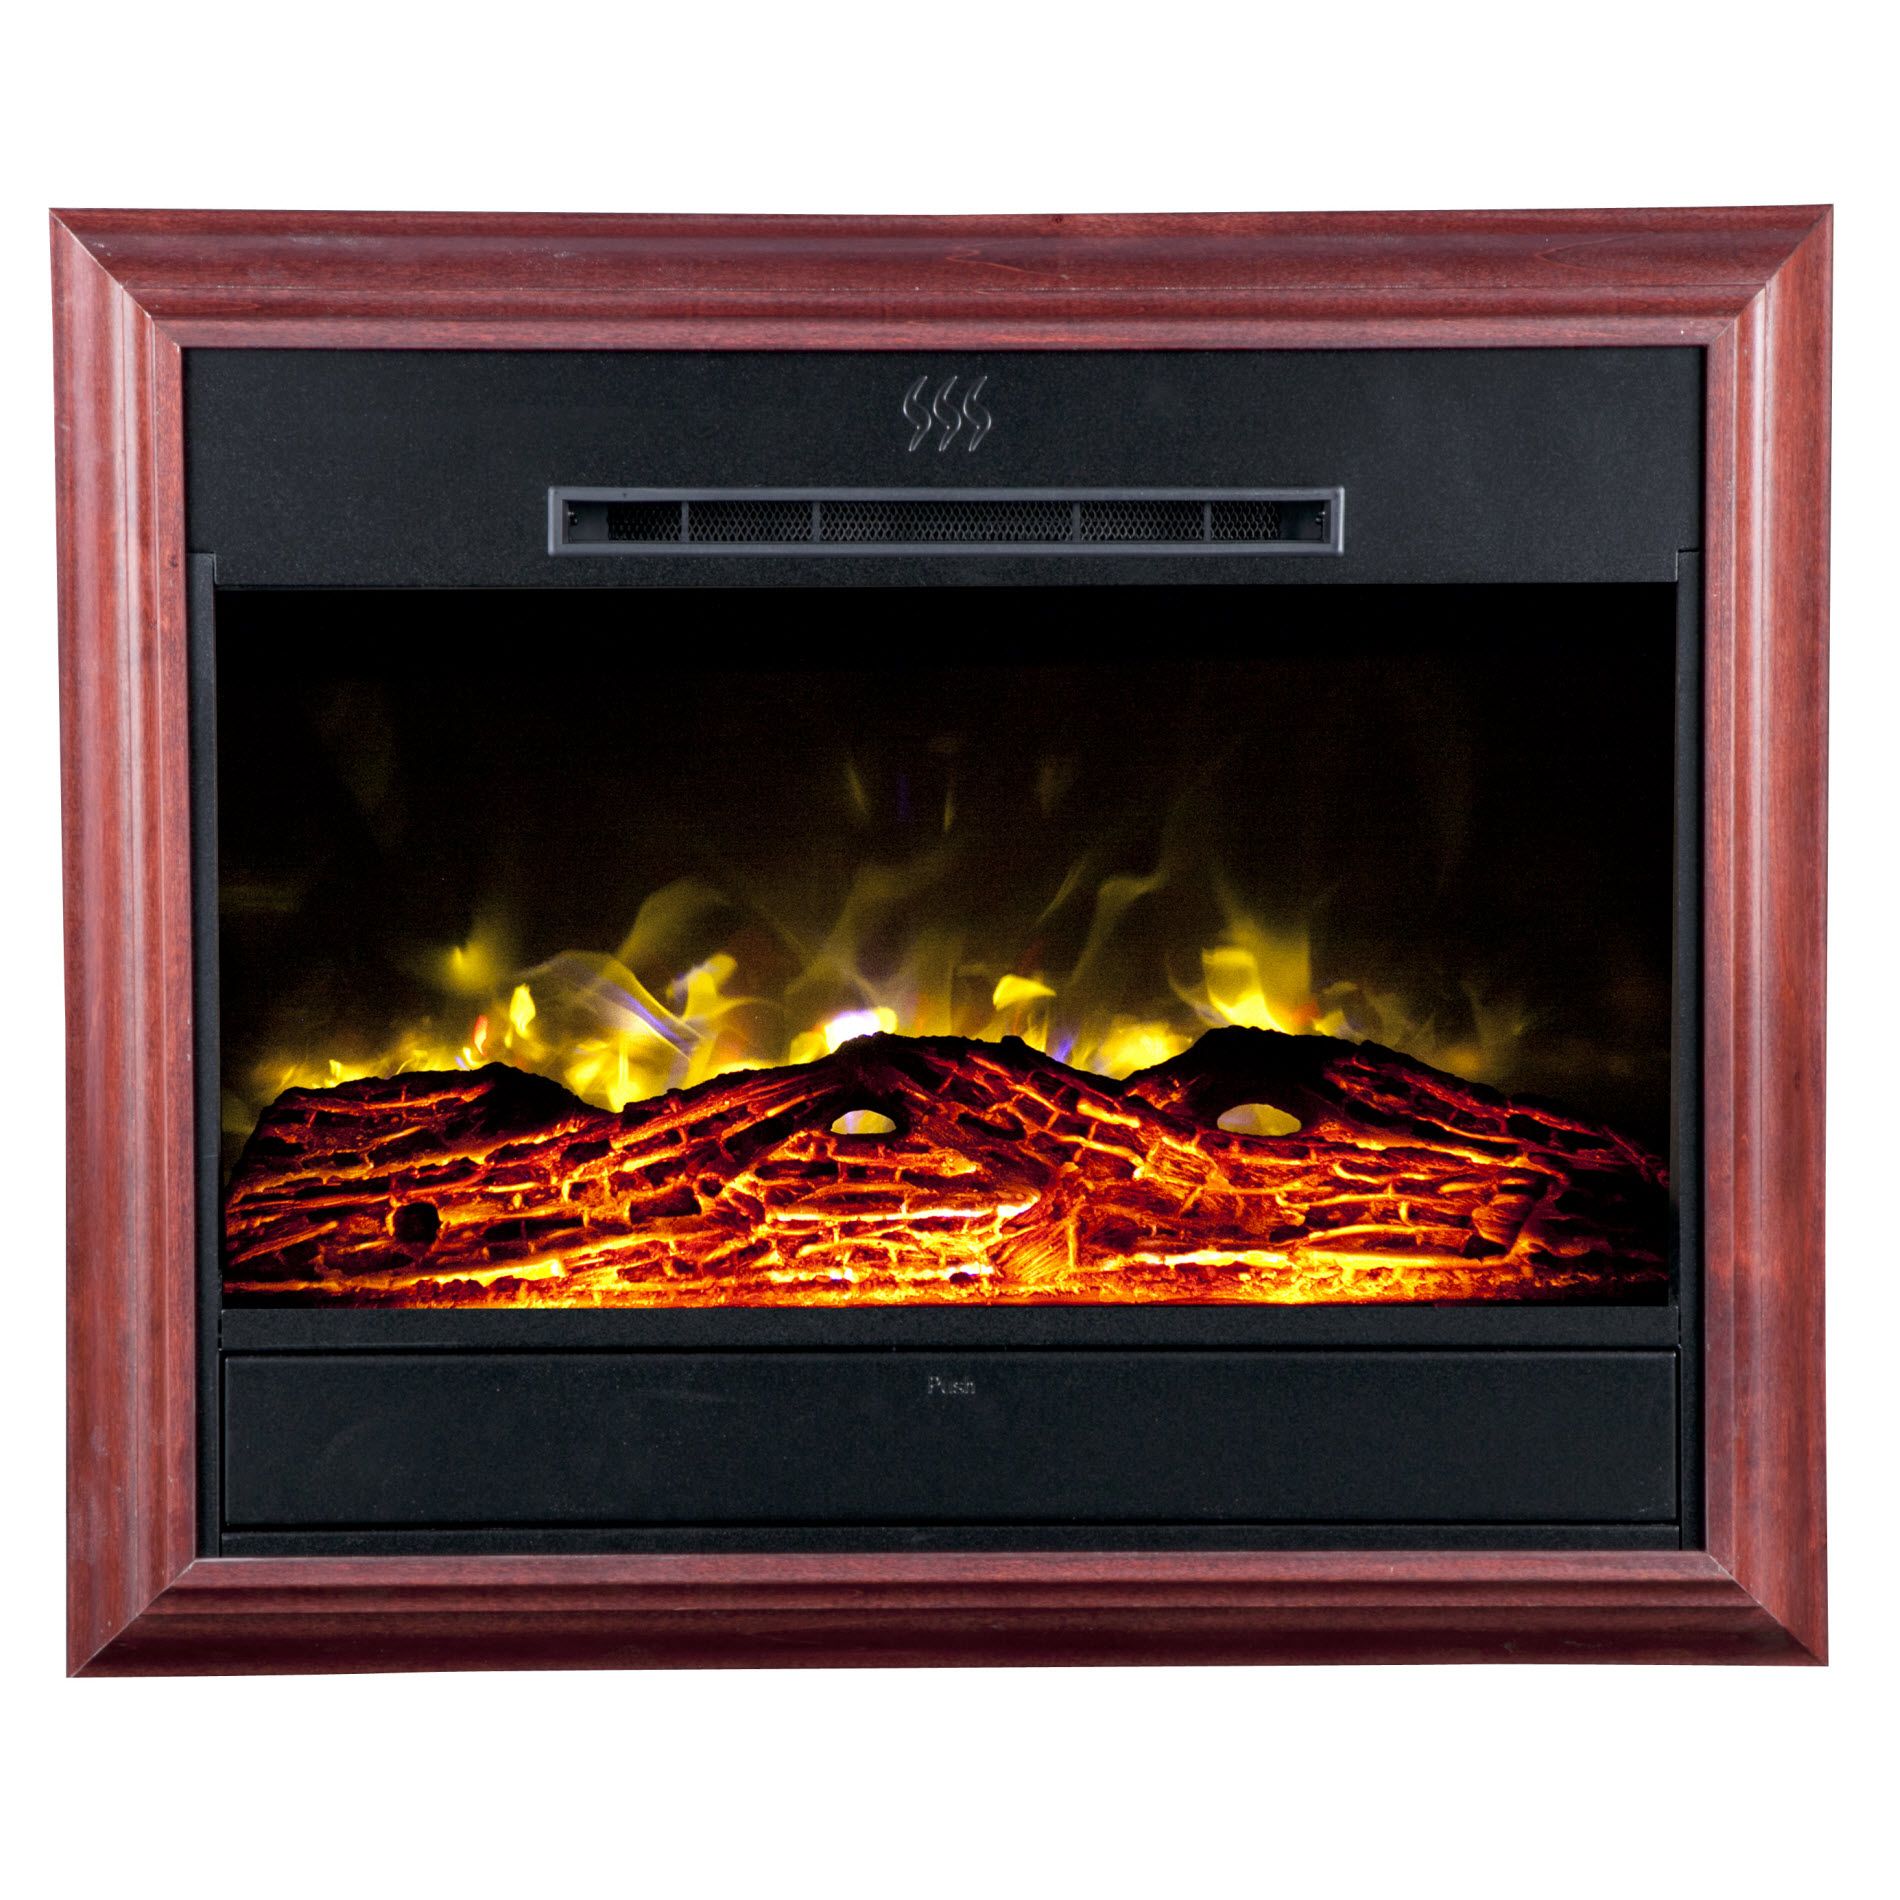 Shop for a Heat Surge Portrait Wall-Mounted Electric Fireplace  - Cherry (30000532) at Sears Outlet today! We offer low prices and great service.